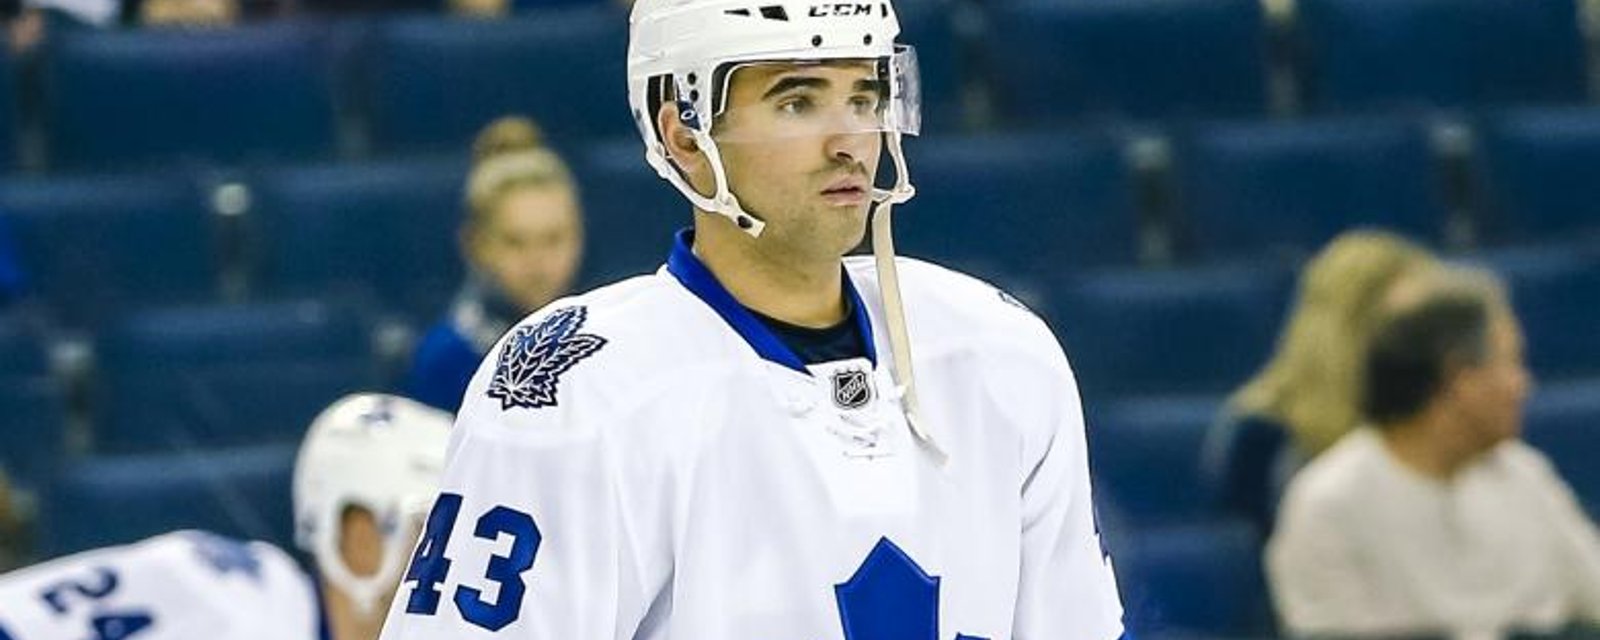 Breaking: NHL dishes out a big suspension for Nazem Kadri's ugly crosscheck.